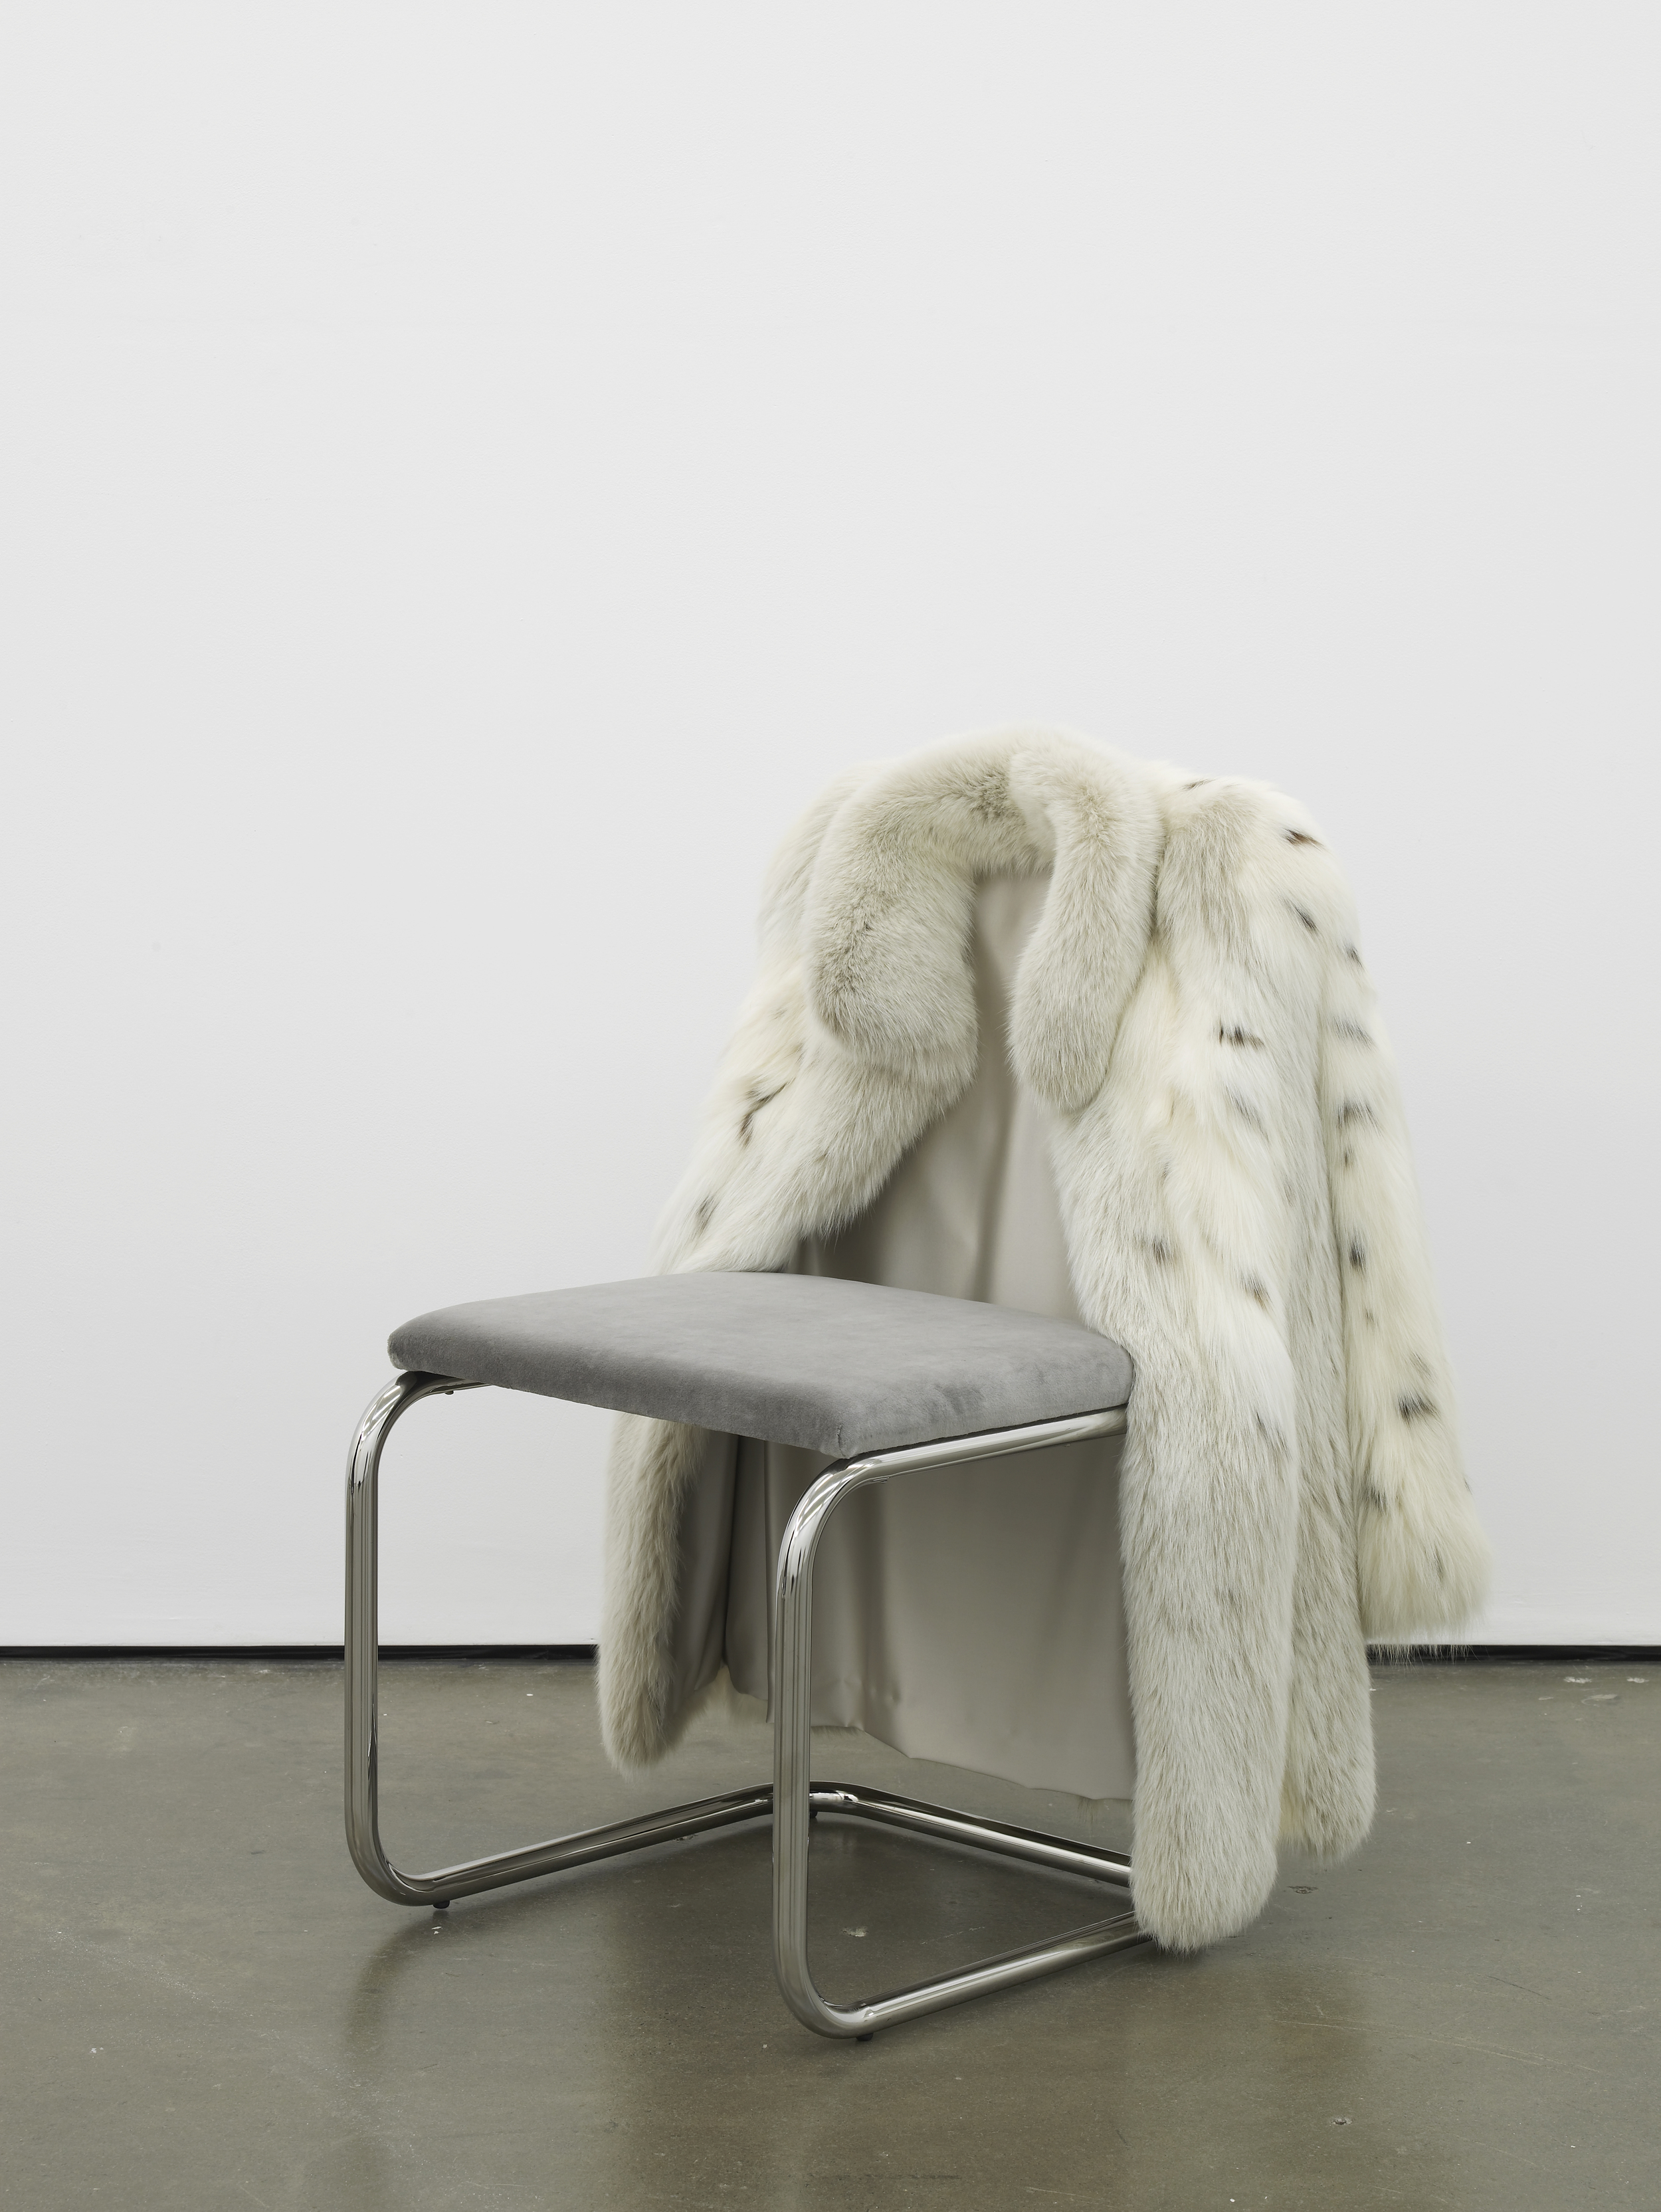     Untitled Chair - CSFX-0 2015 Vintage fur, steel tubing, upholstery, silk and velvet 85 x 65 x 60 cm / 33.4 x 25.5 x 23.6 in 